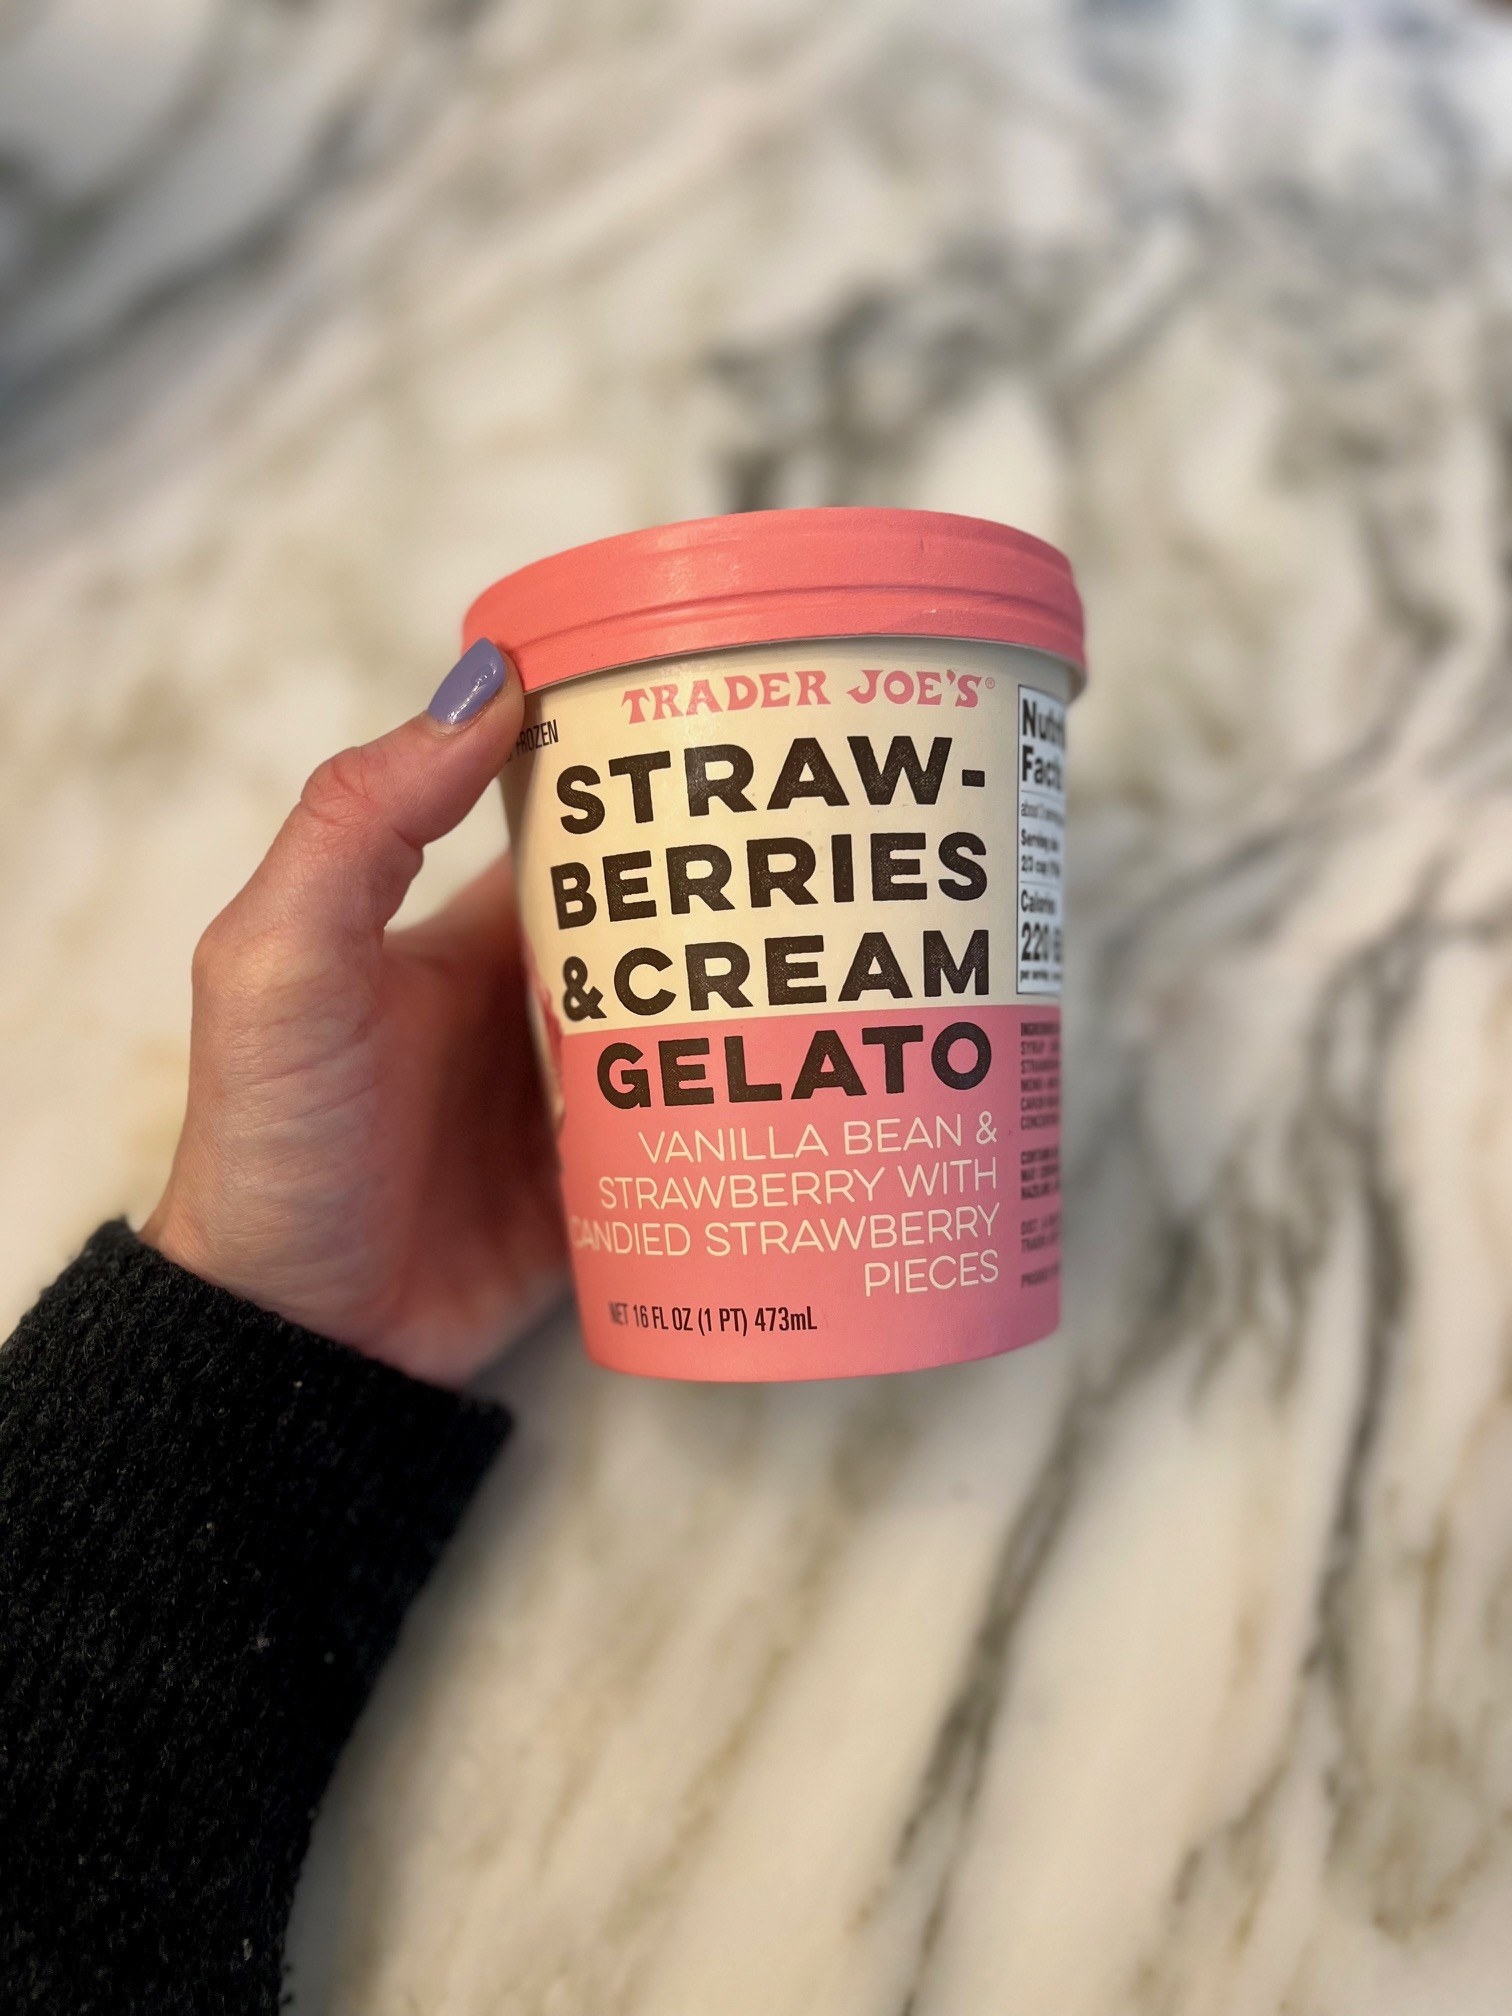 A pint of strawberries and cream gelato.